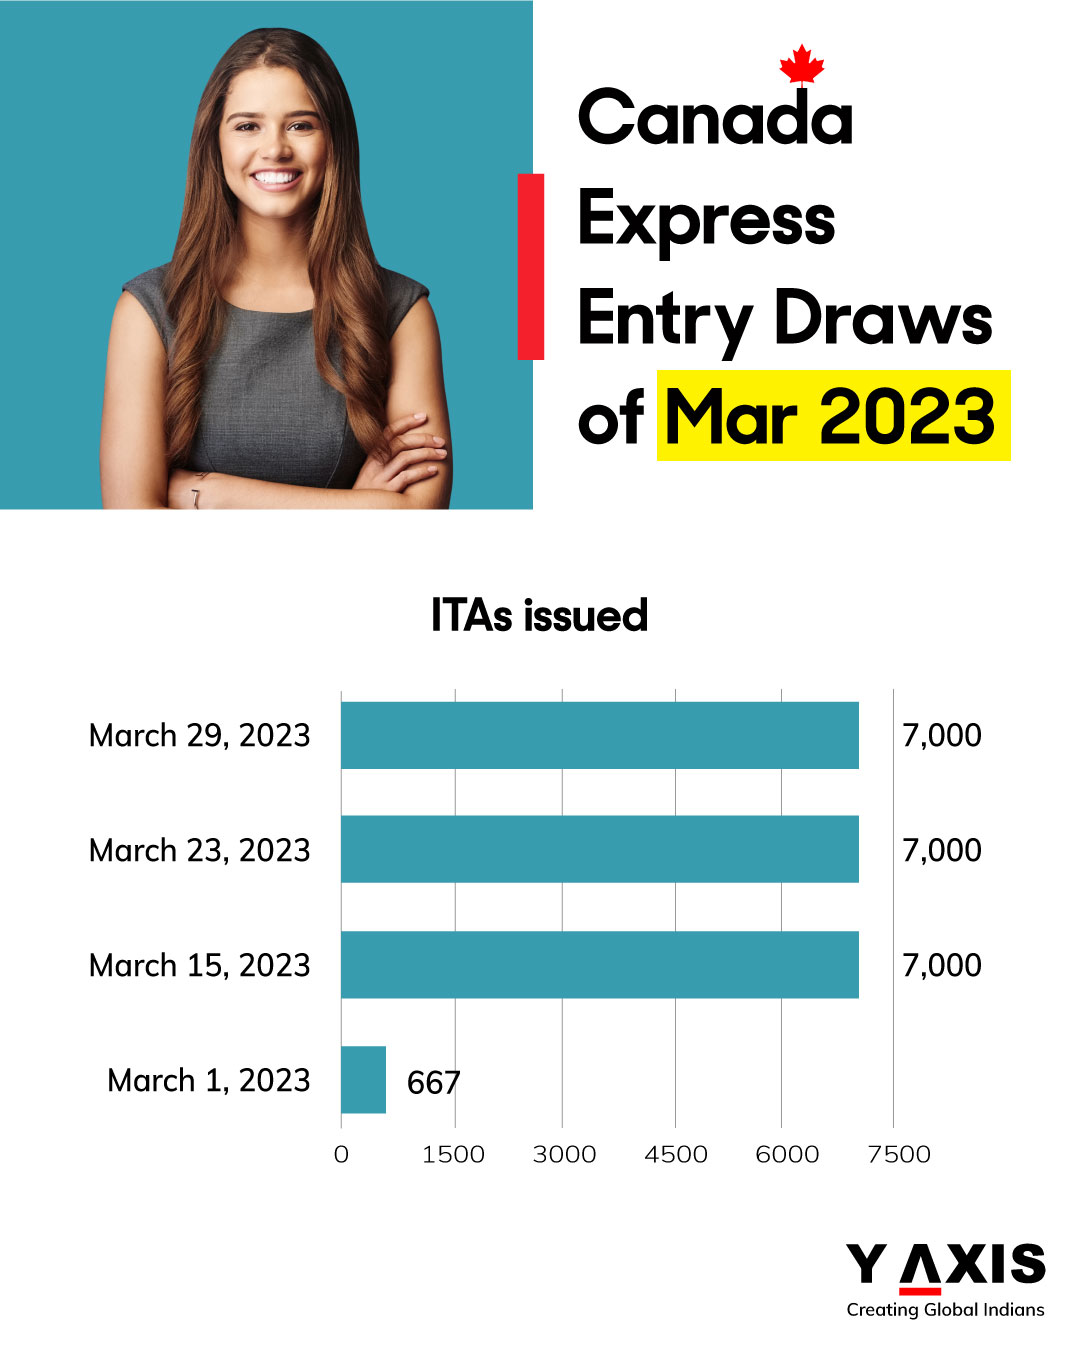 Express Entry Draws of Mar 2023